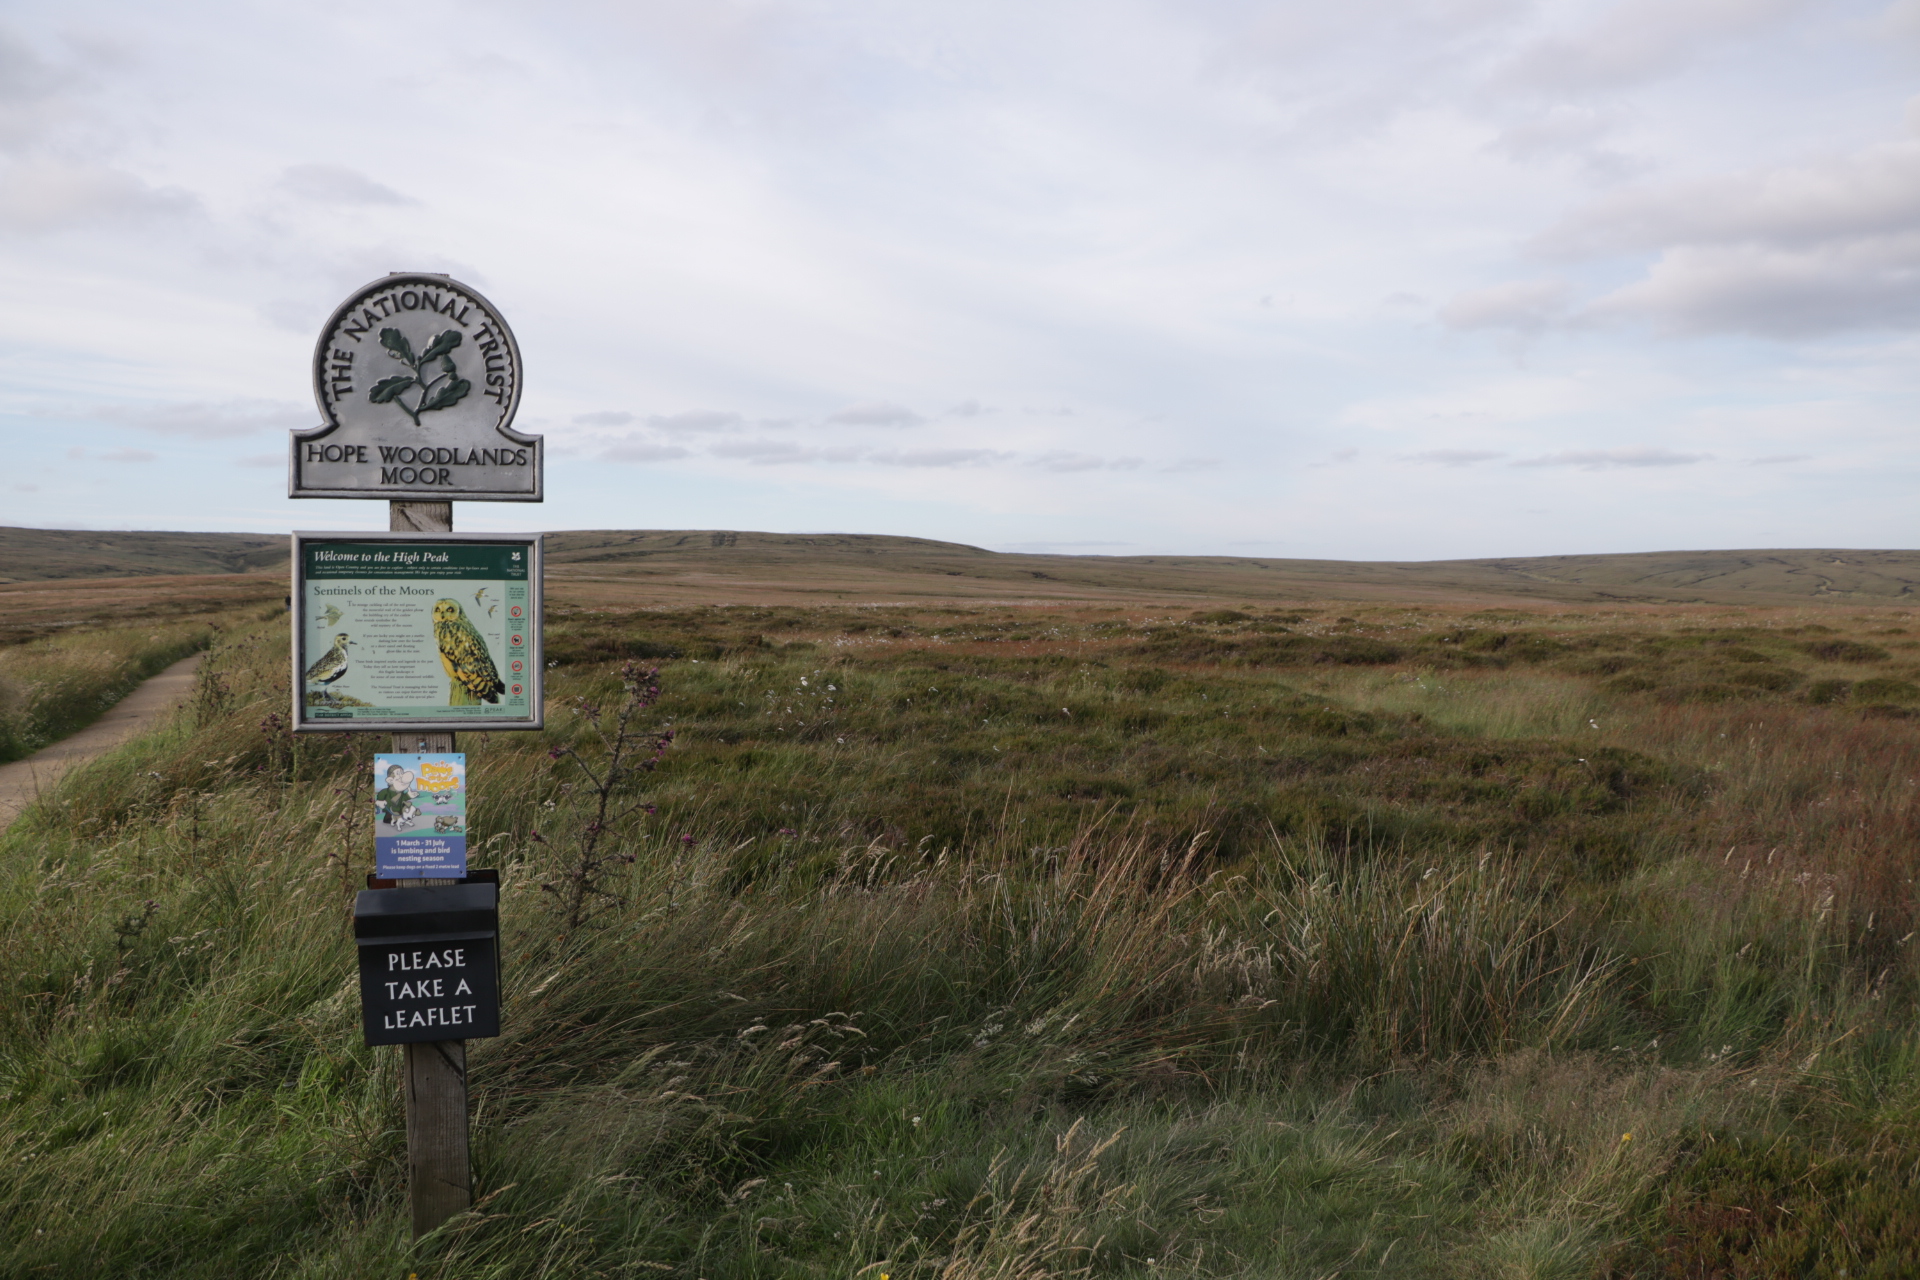 The National Trust grouse shooting muddle – Mark Avery